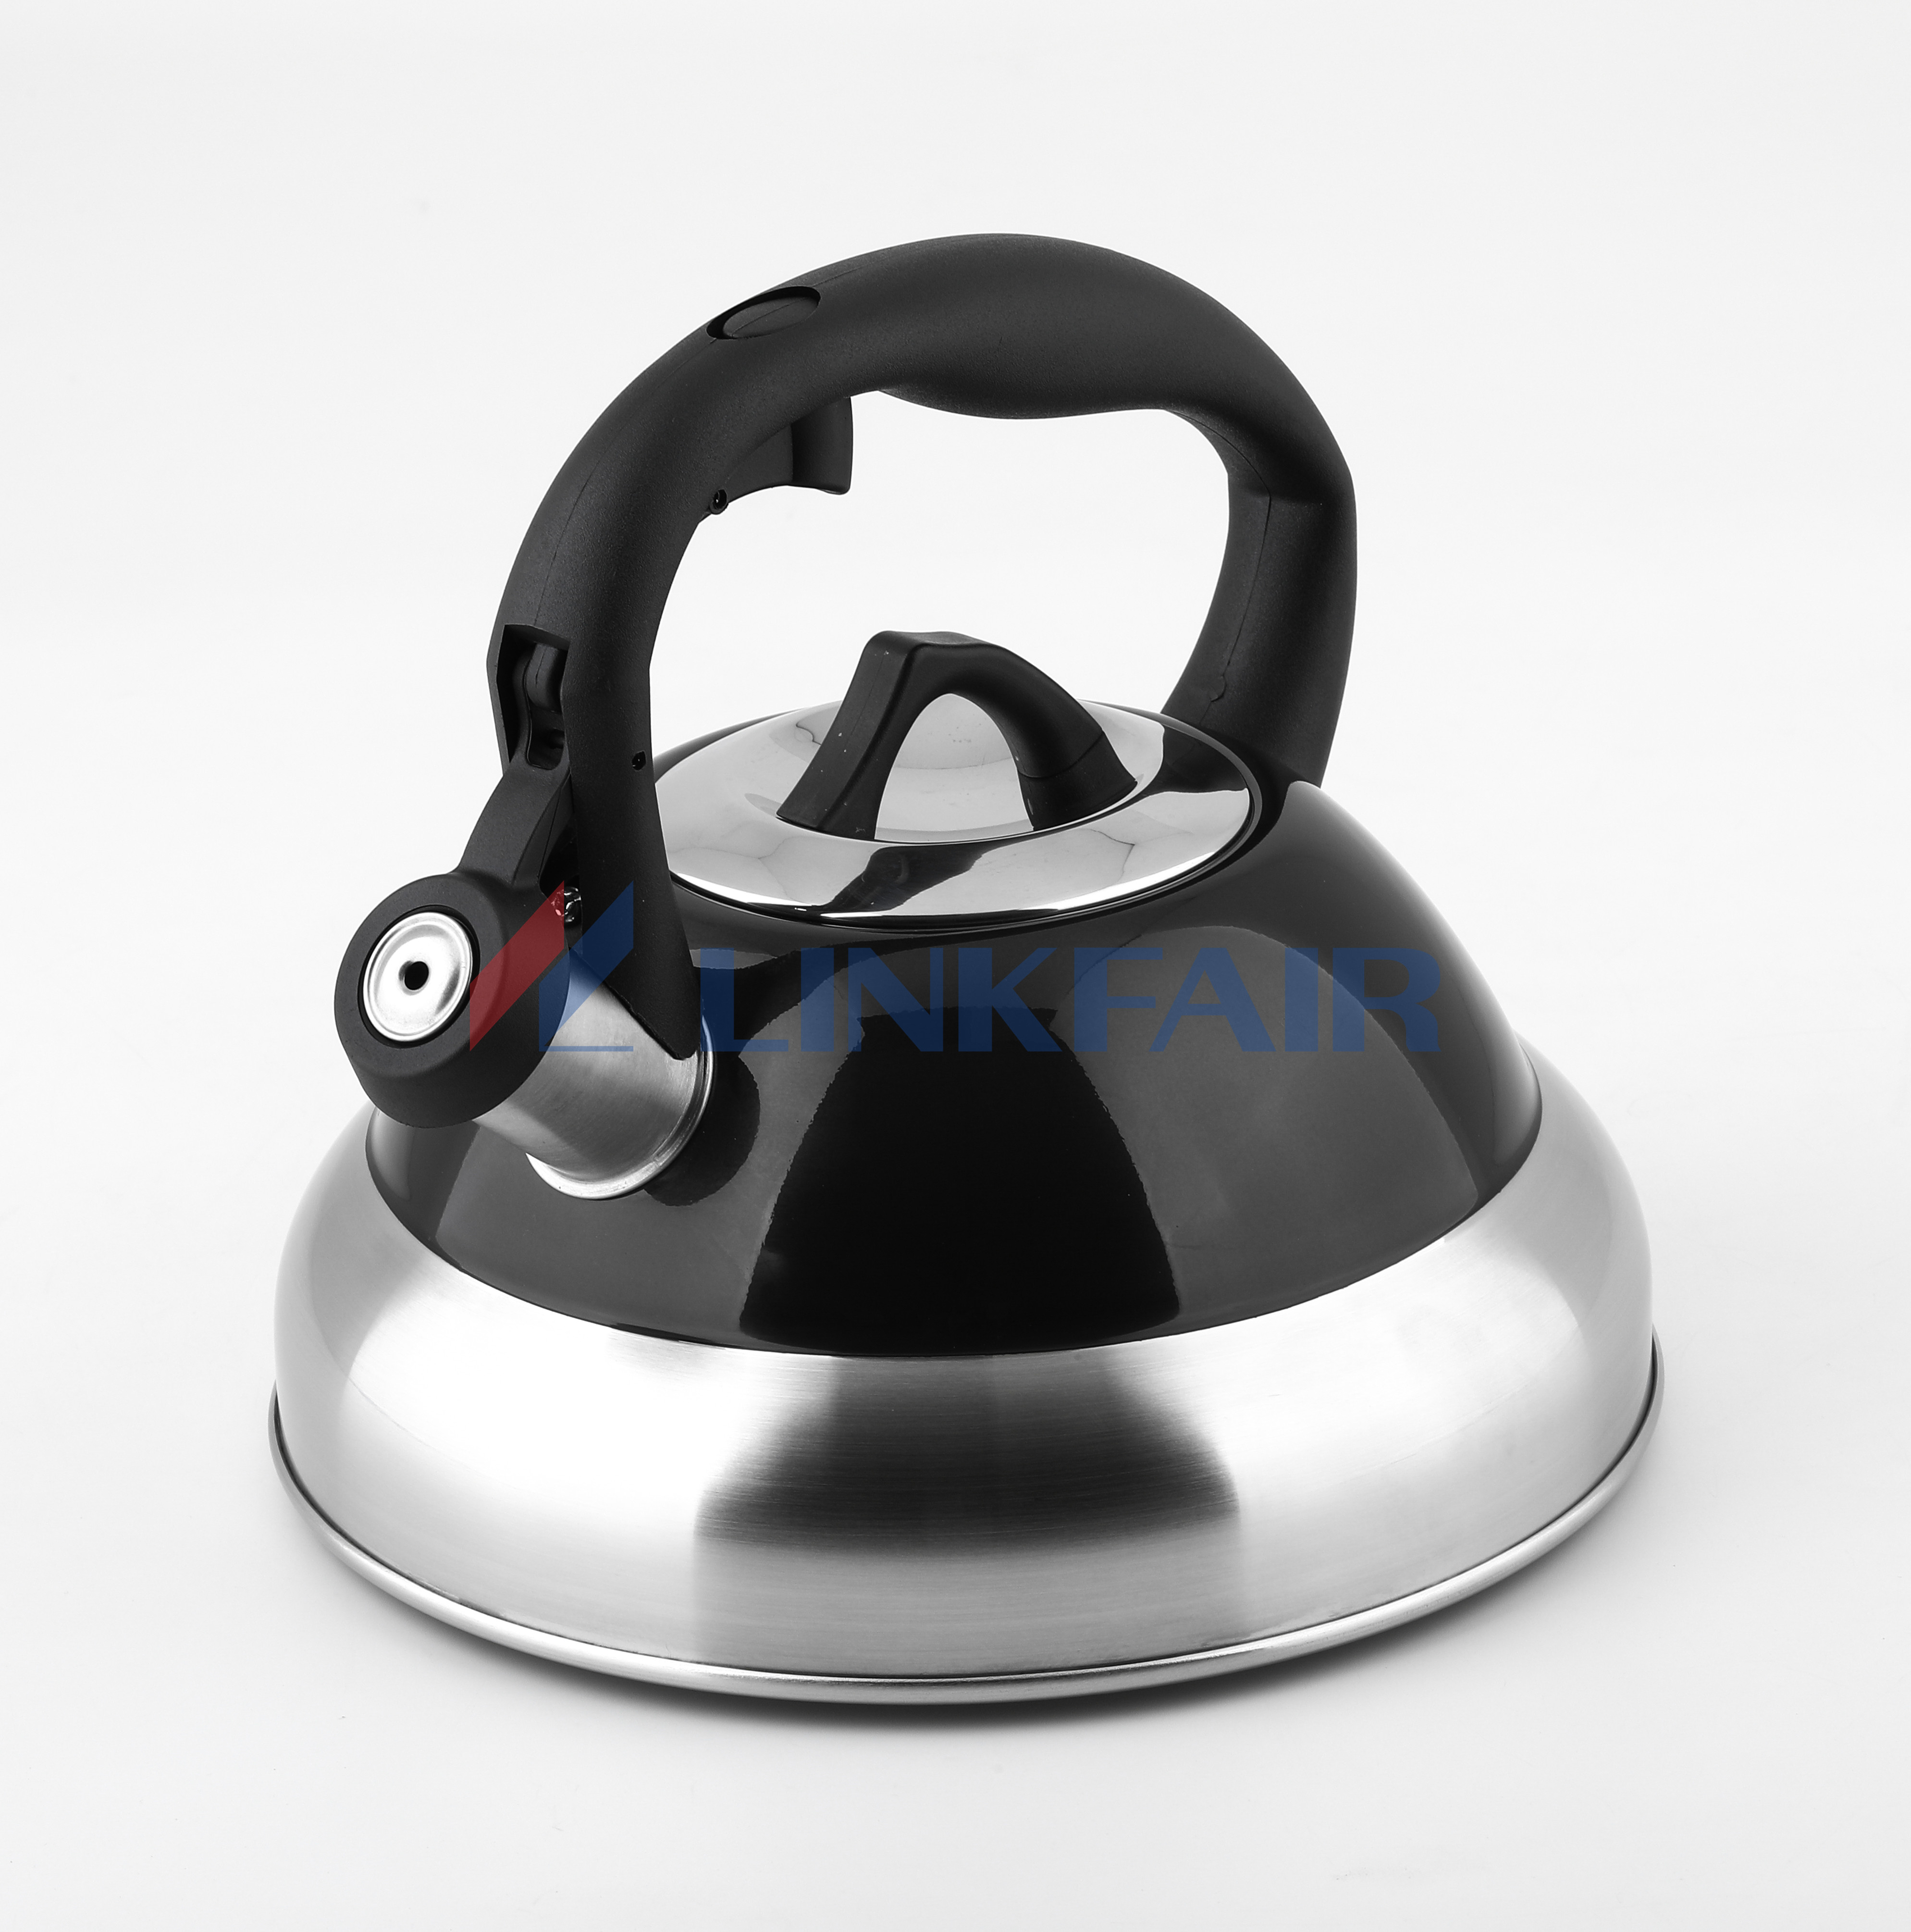 2.6L Stainless Steel Tea Kettle, Stainless Steel, Double Color